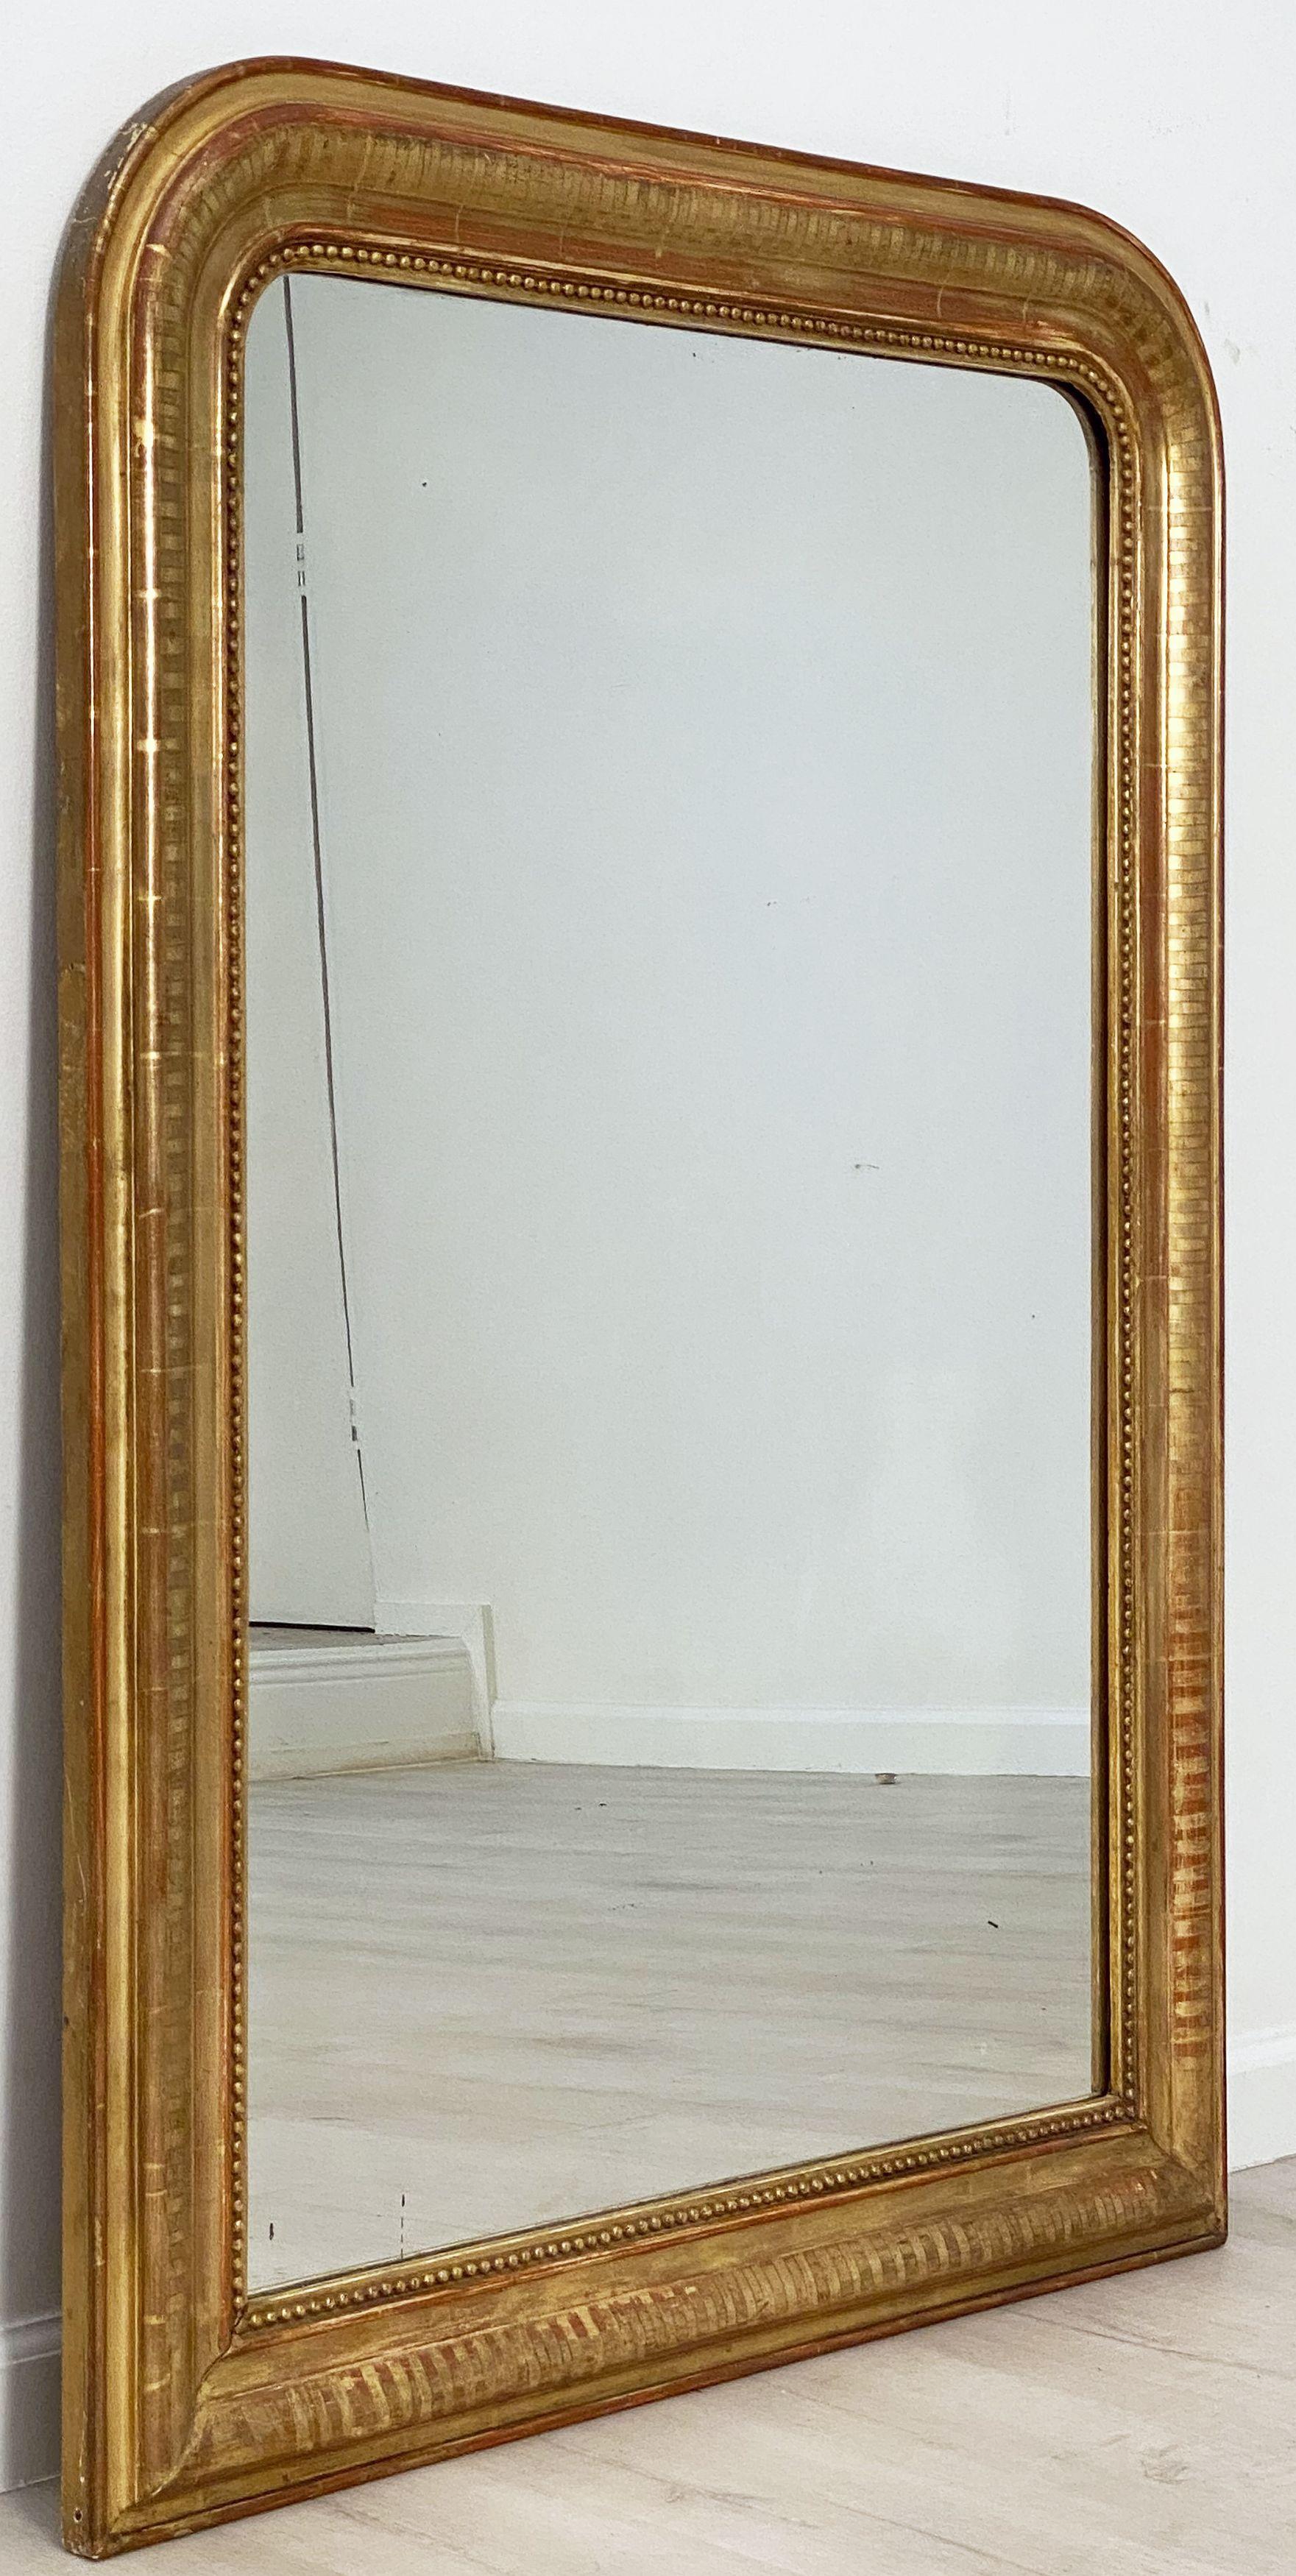 A handsome large Louis Philippe gilt wall mirror featuring a lovely moulded surround and an etched design showing through gold-leaf.

Dimensions: H 50 5/8 inches x W 37 1/4 inches

Other sizes available in this style.